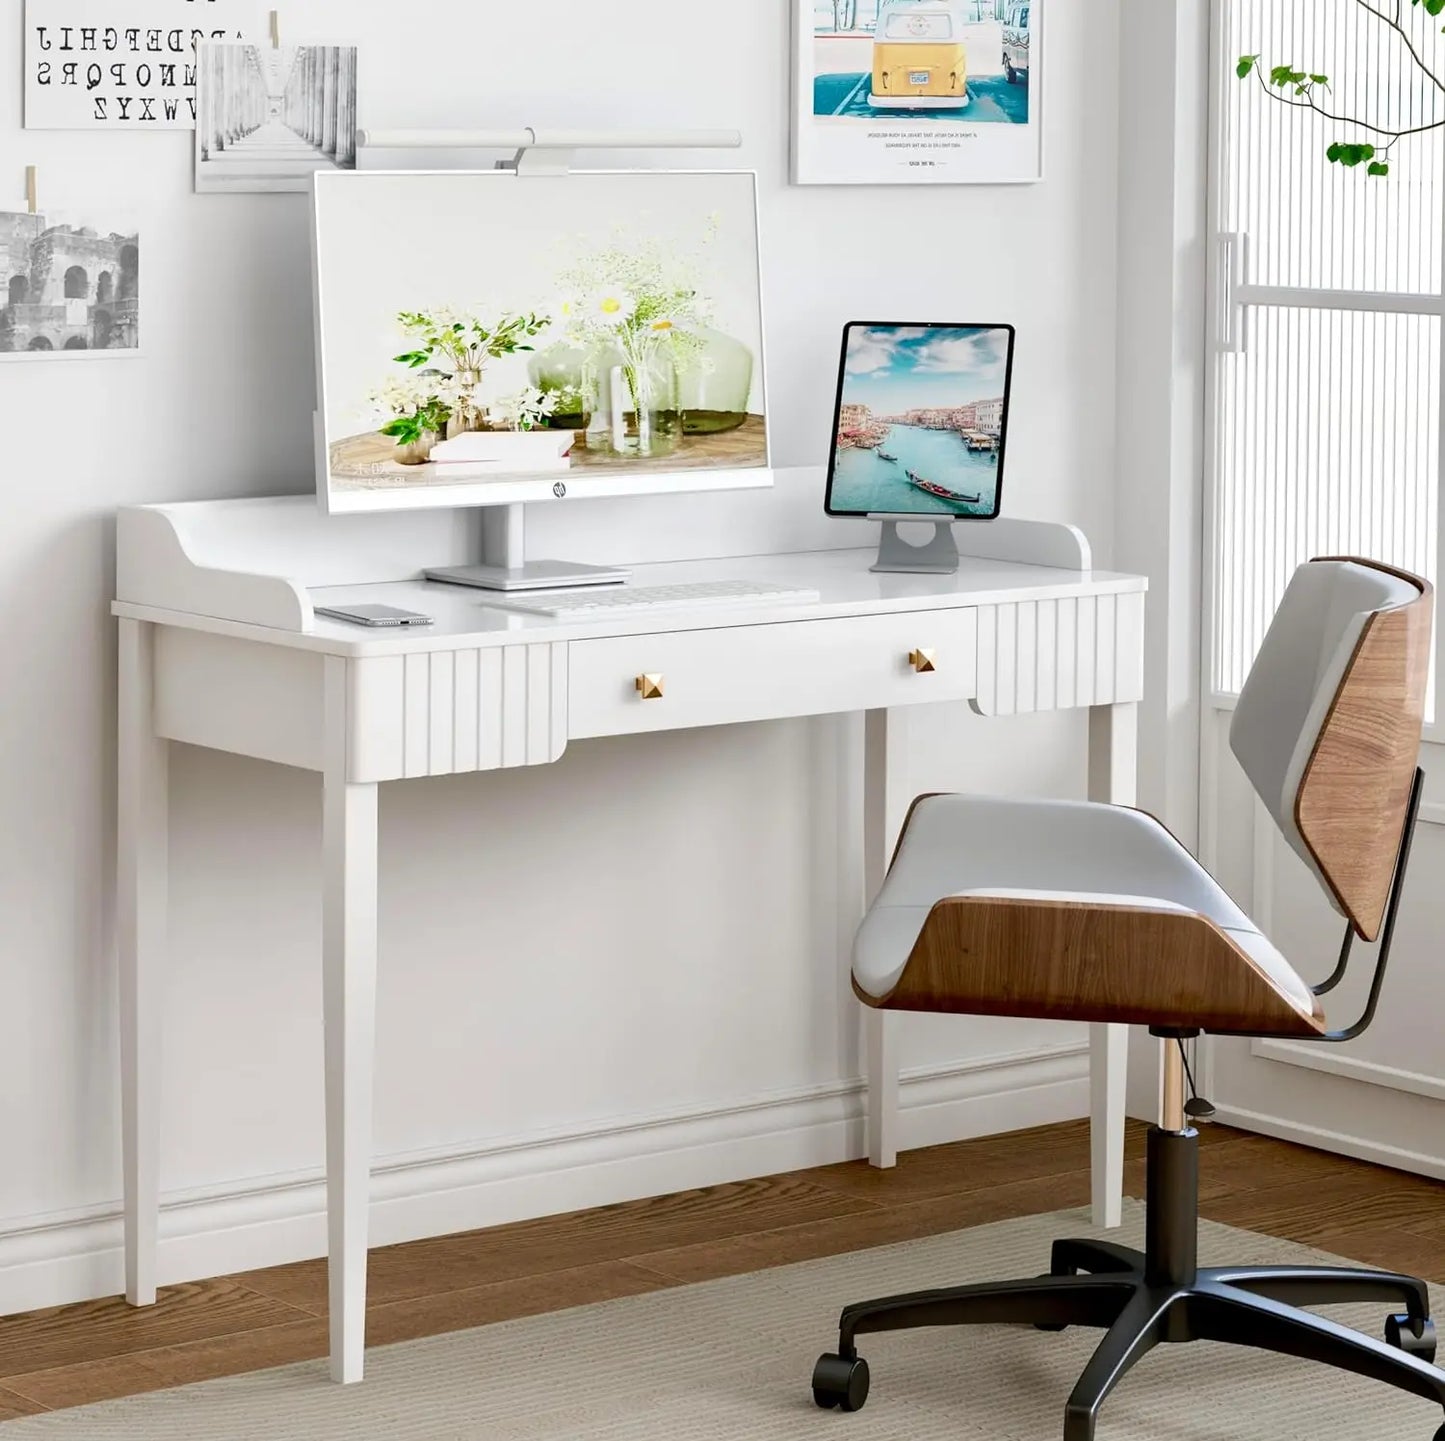 Vintage-Style Desk with Scandinavian Flair